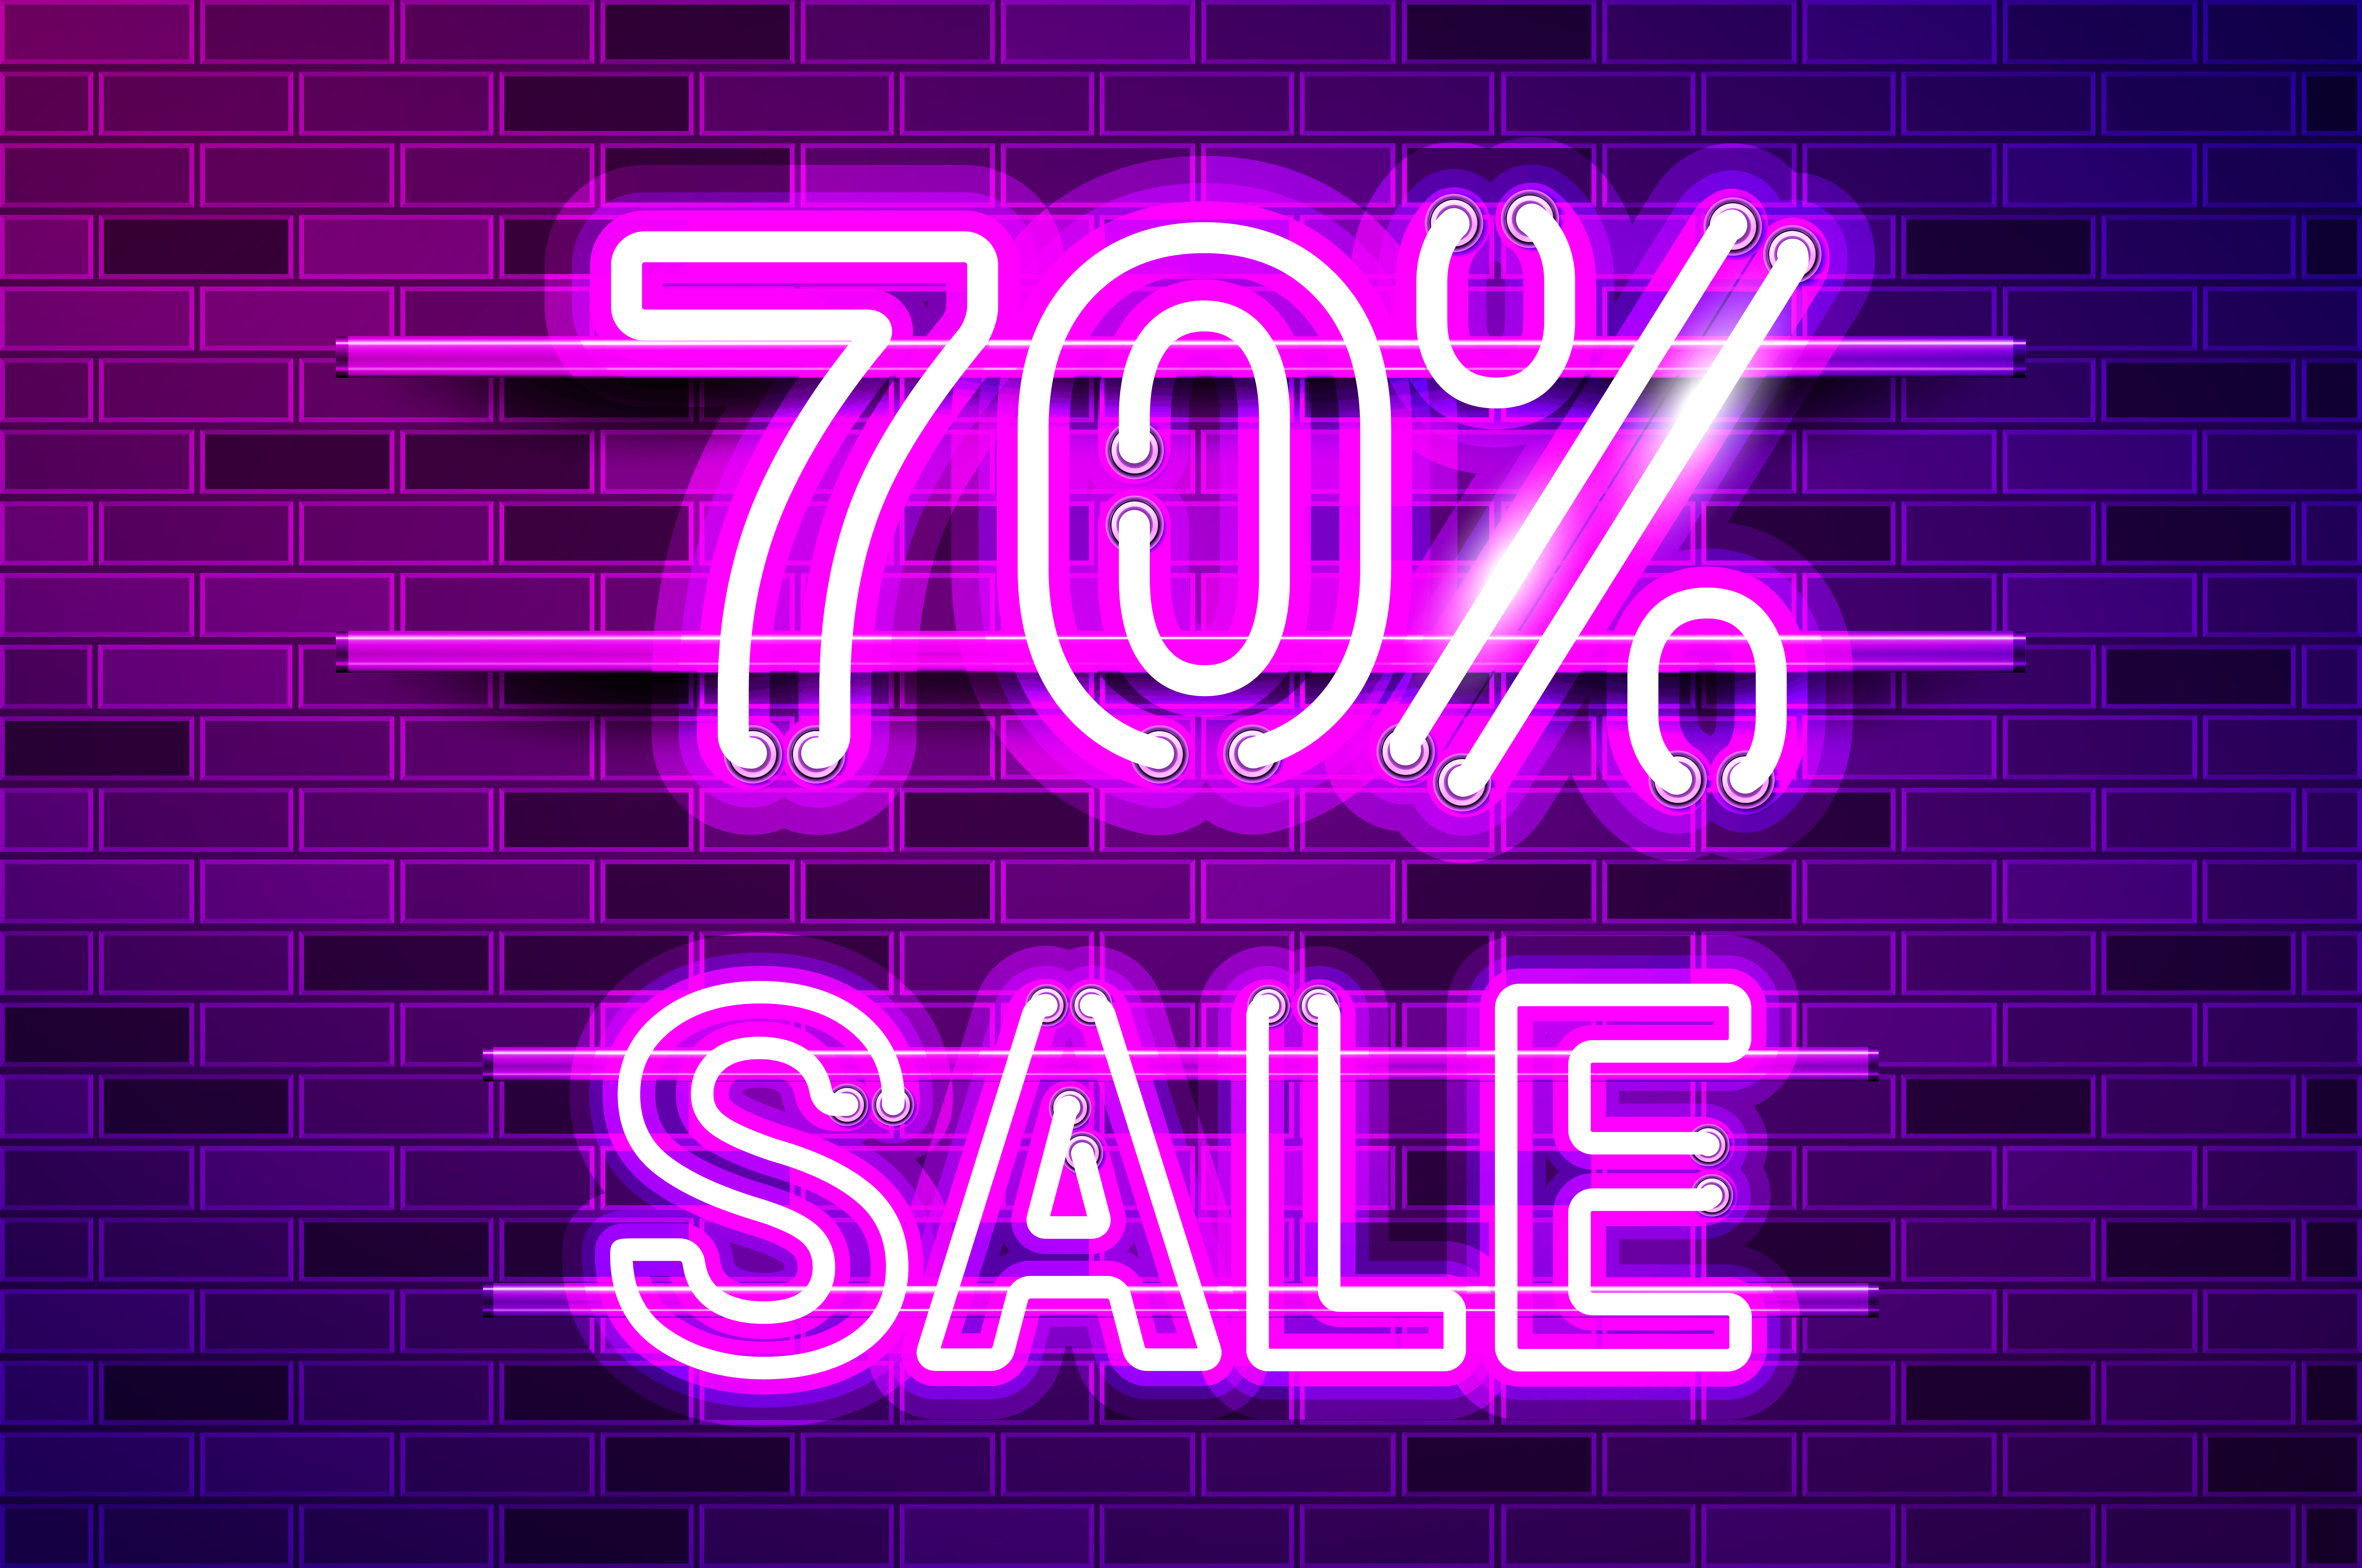 70 percent SALE glowing neon lamp sign. Realistic vector illustration. Purple brick wall, violet glow, metal holders.. 70 percent SALE glowing purple neon lamp sign